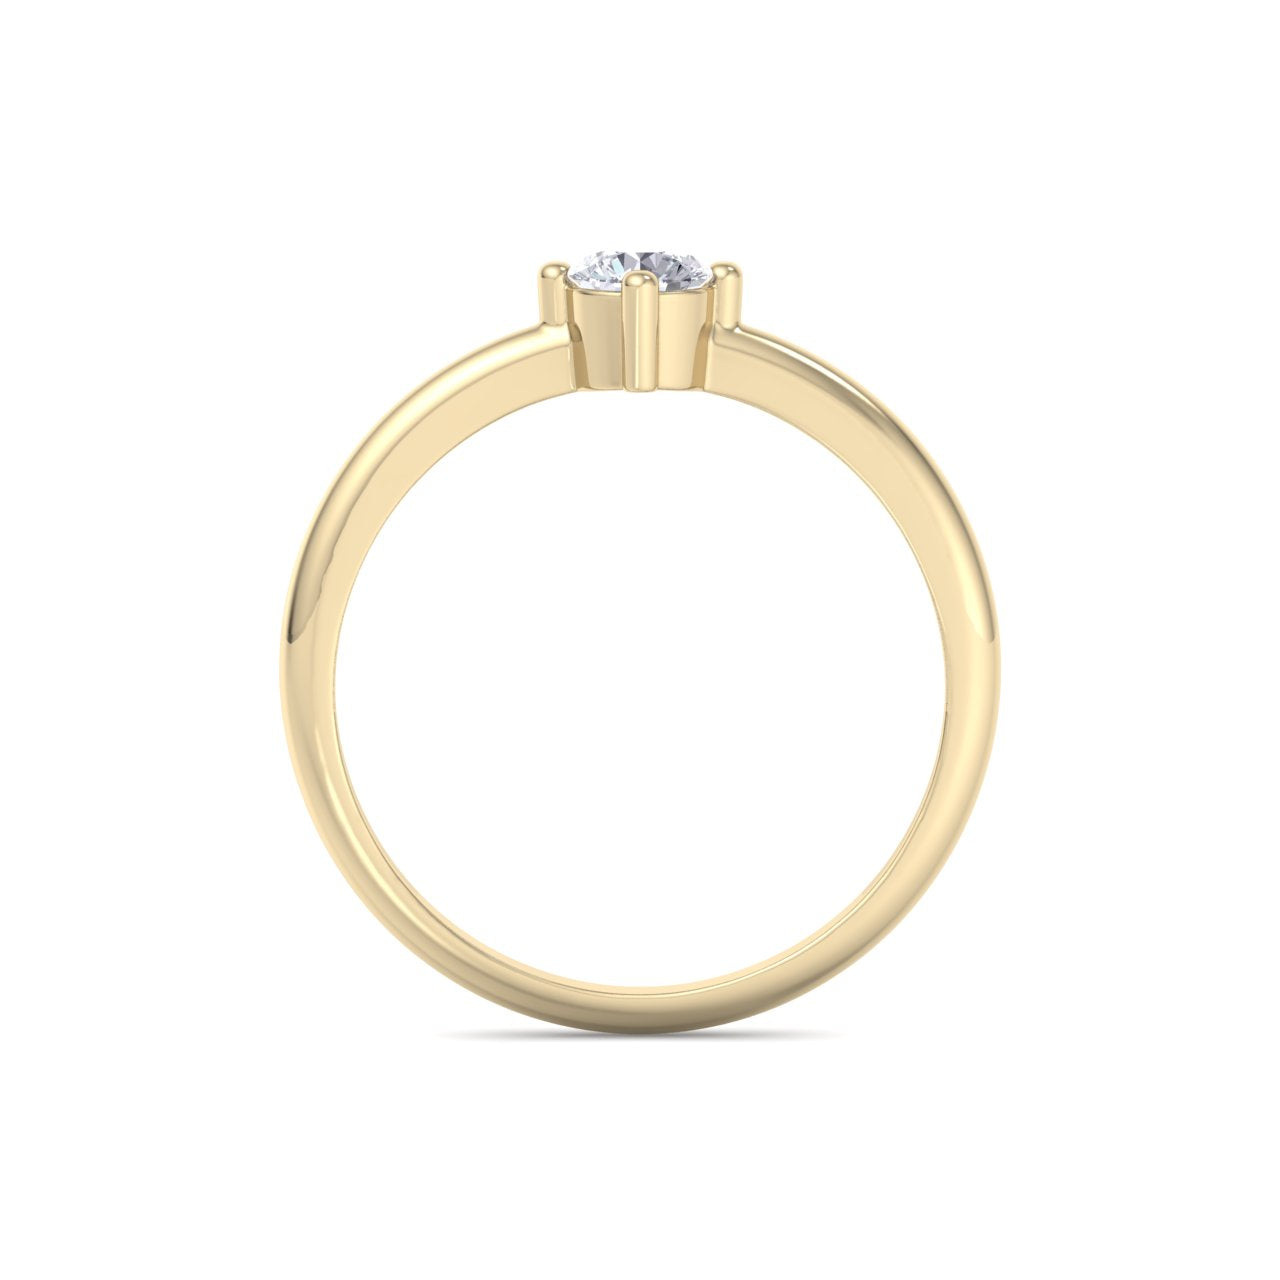 Round shaped petite diamond ring in rose gold with white diamonds of 0.25 ct in weight